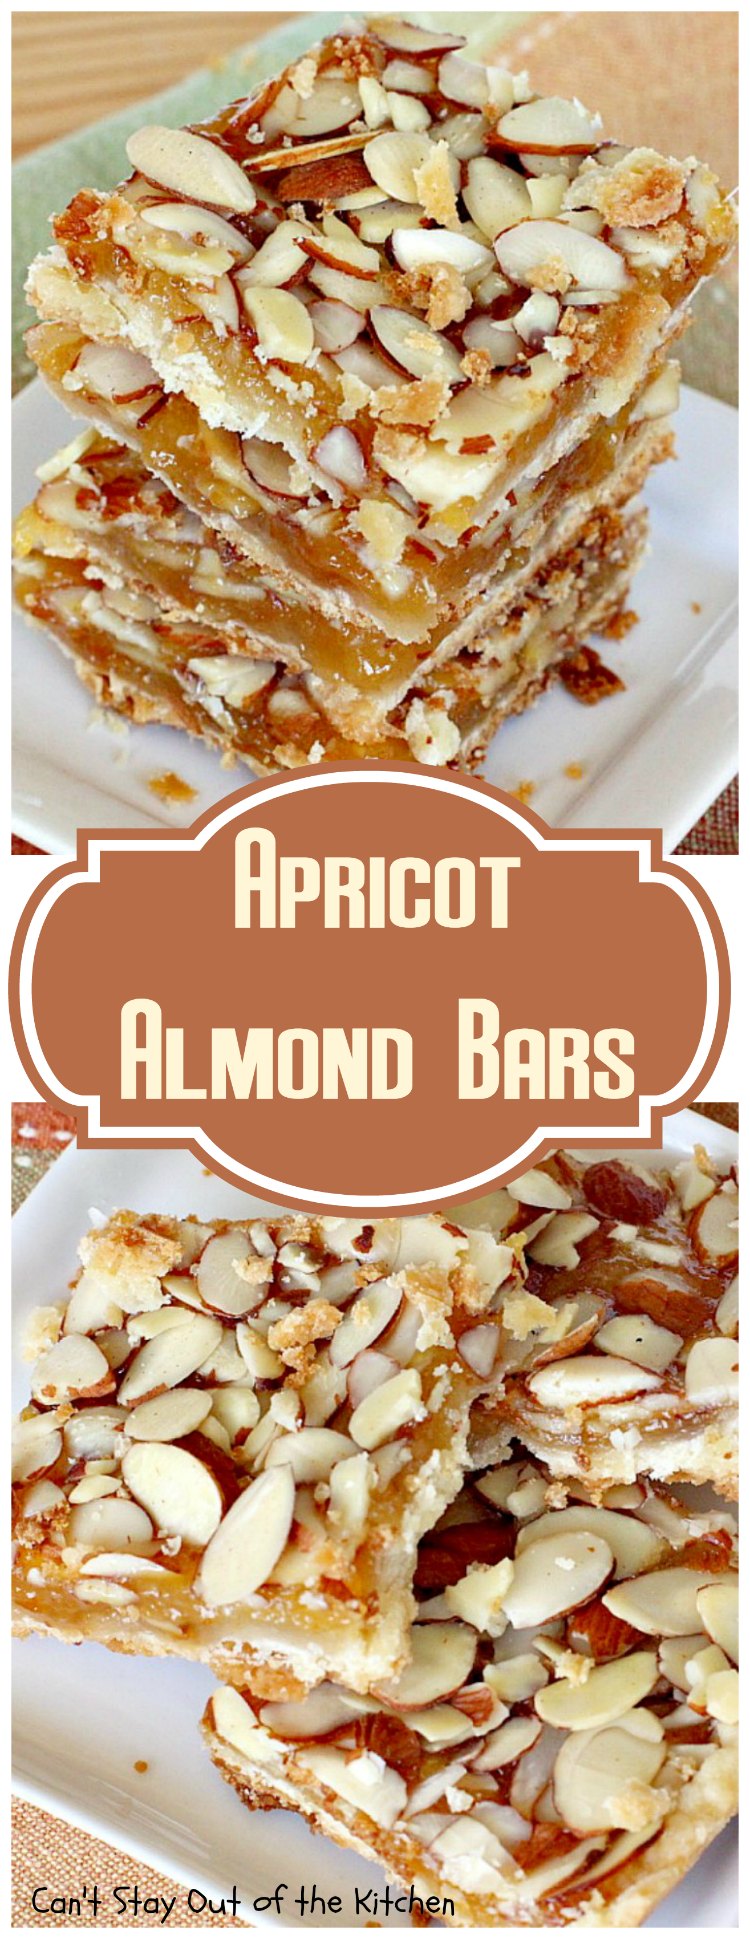 Apricot Almond Bars | Can't Stay Out of the Kitchen